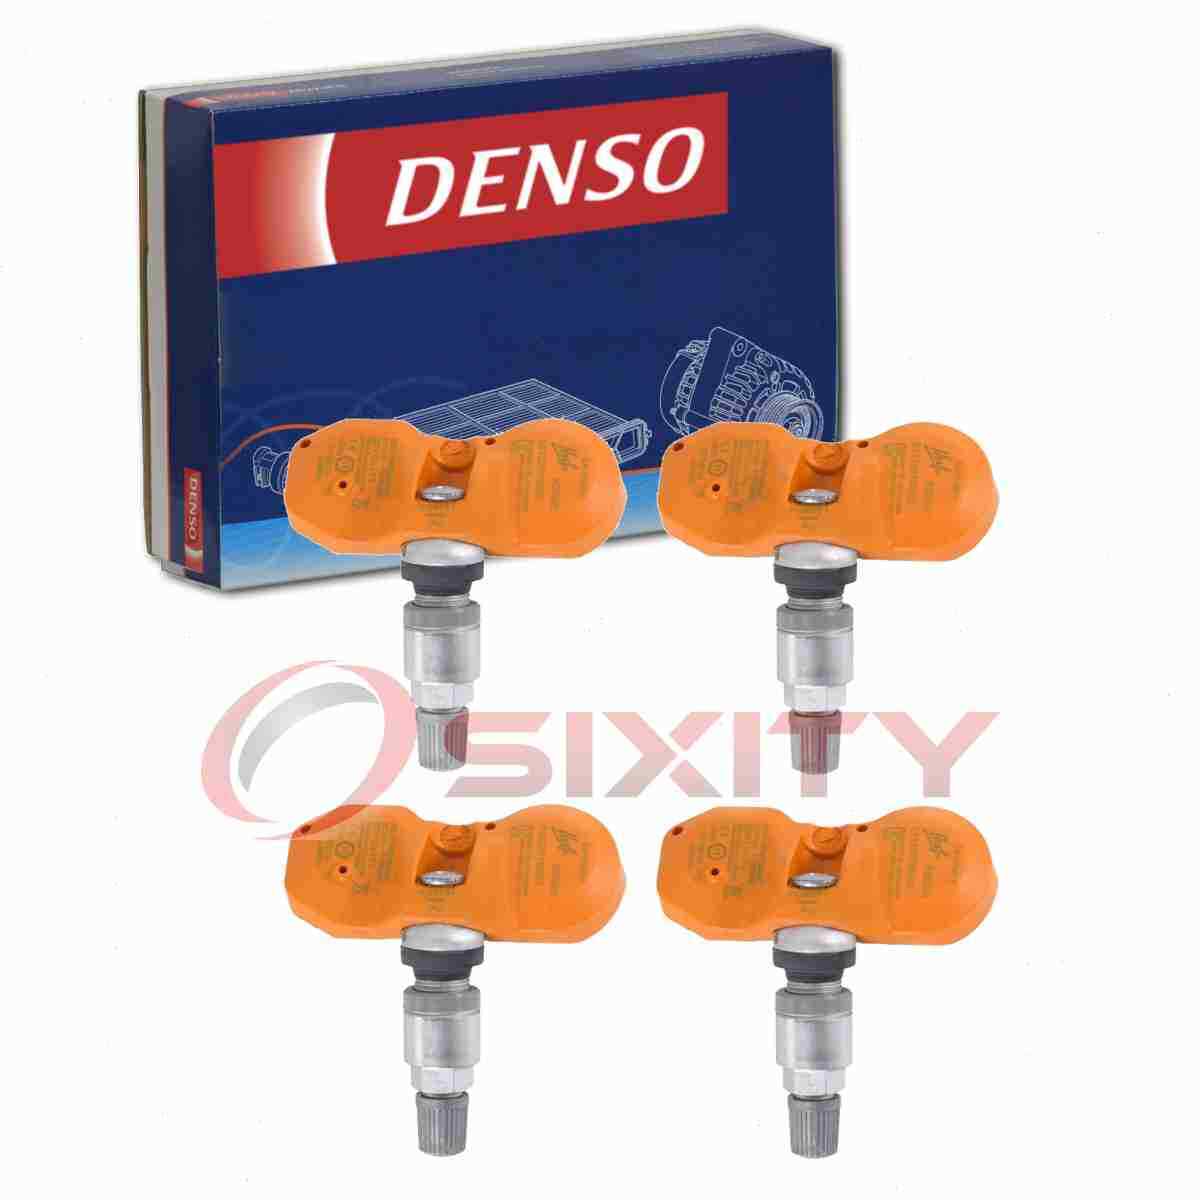 4 pc Denso Tire Pressure Monitoring System Sensors for 1999 BMW 323is Wheel  vb